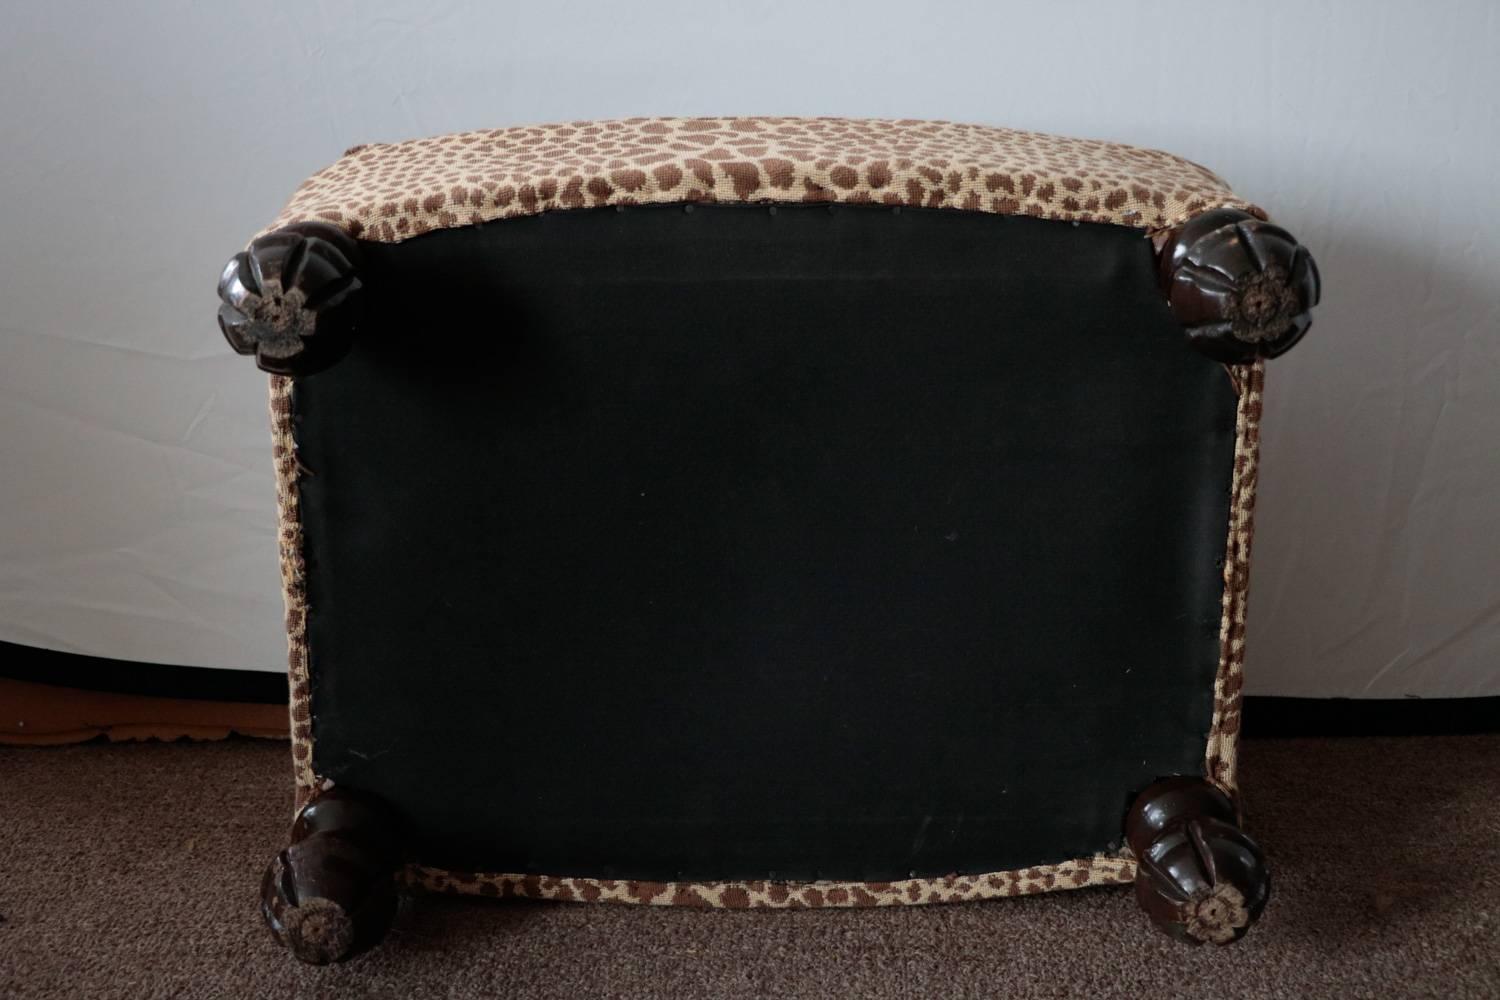 20th Century ON SALE NOW!  Hot to Trot 1950 Mid Mod Cheetah Ottoman 